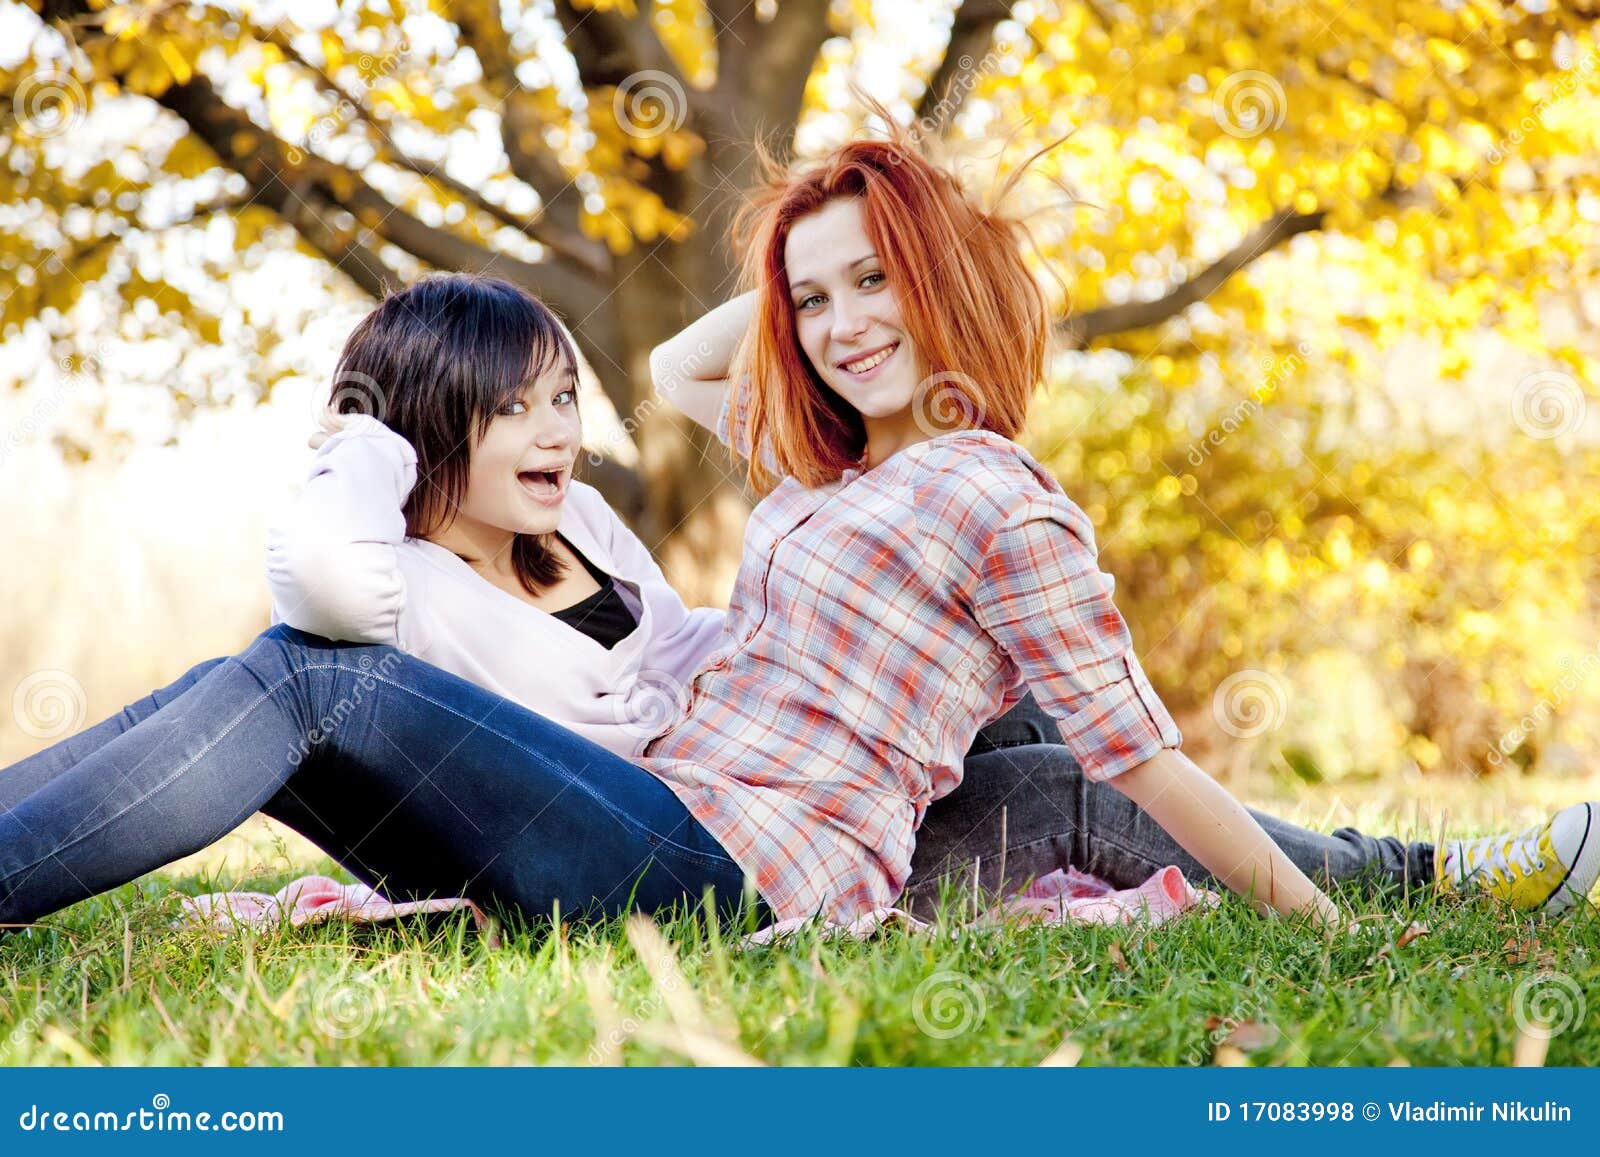 Two Beautiful Girlfriends at the Autumn Park Stock Photo - Image of ...